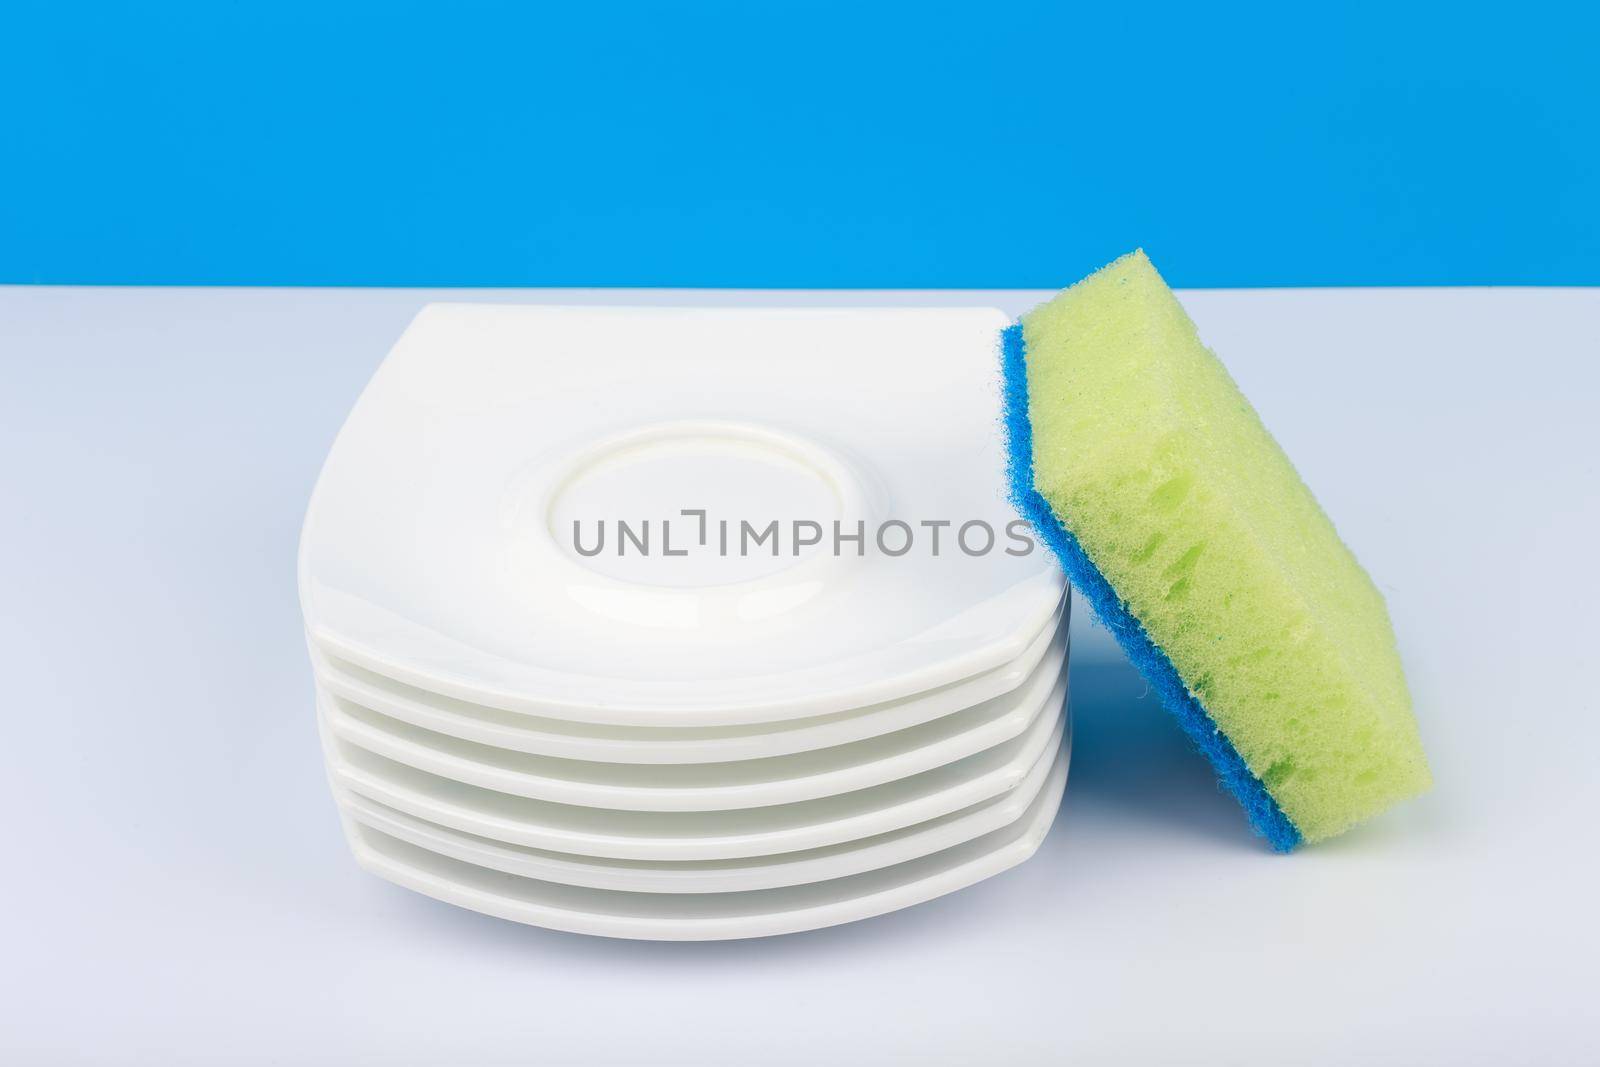 Dishwashing concept, high angle view of cleaning sponge and pile of clean saucers on white table with blue background. Stack of clean plates and dishwashing sponge close up